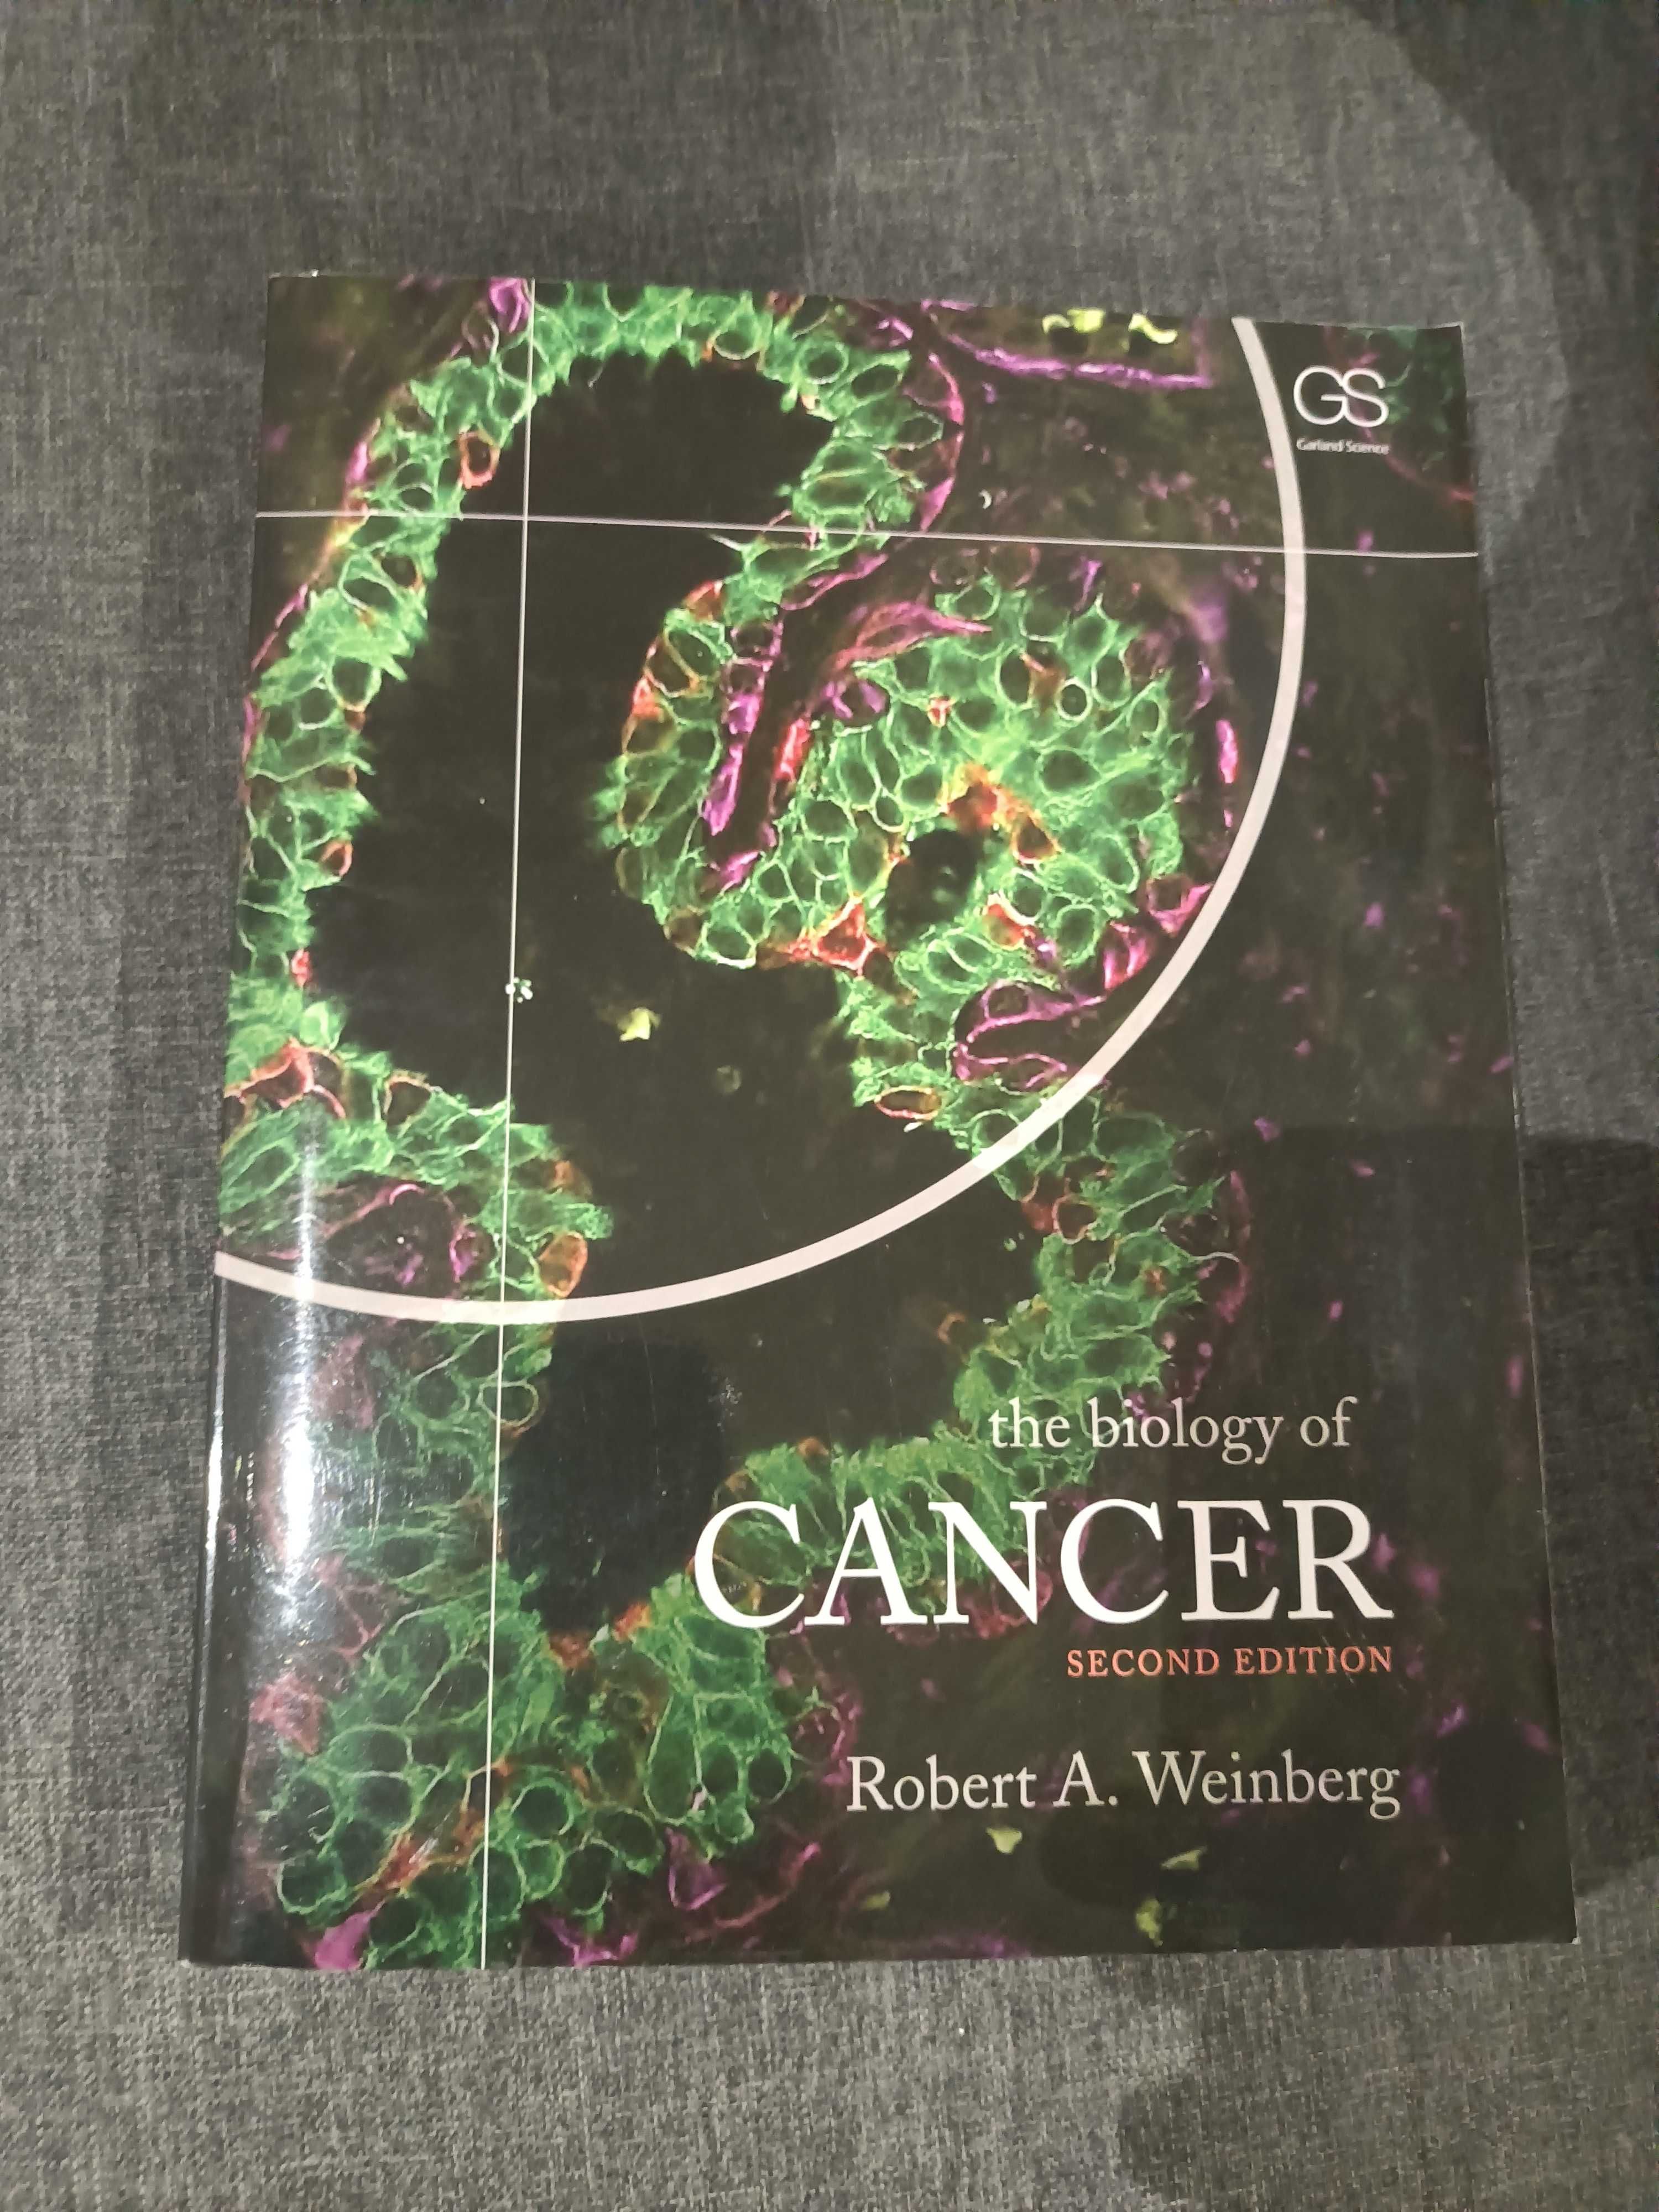 The Biology of Cancer - Second Edition, ROBERT A. WEINBERG